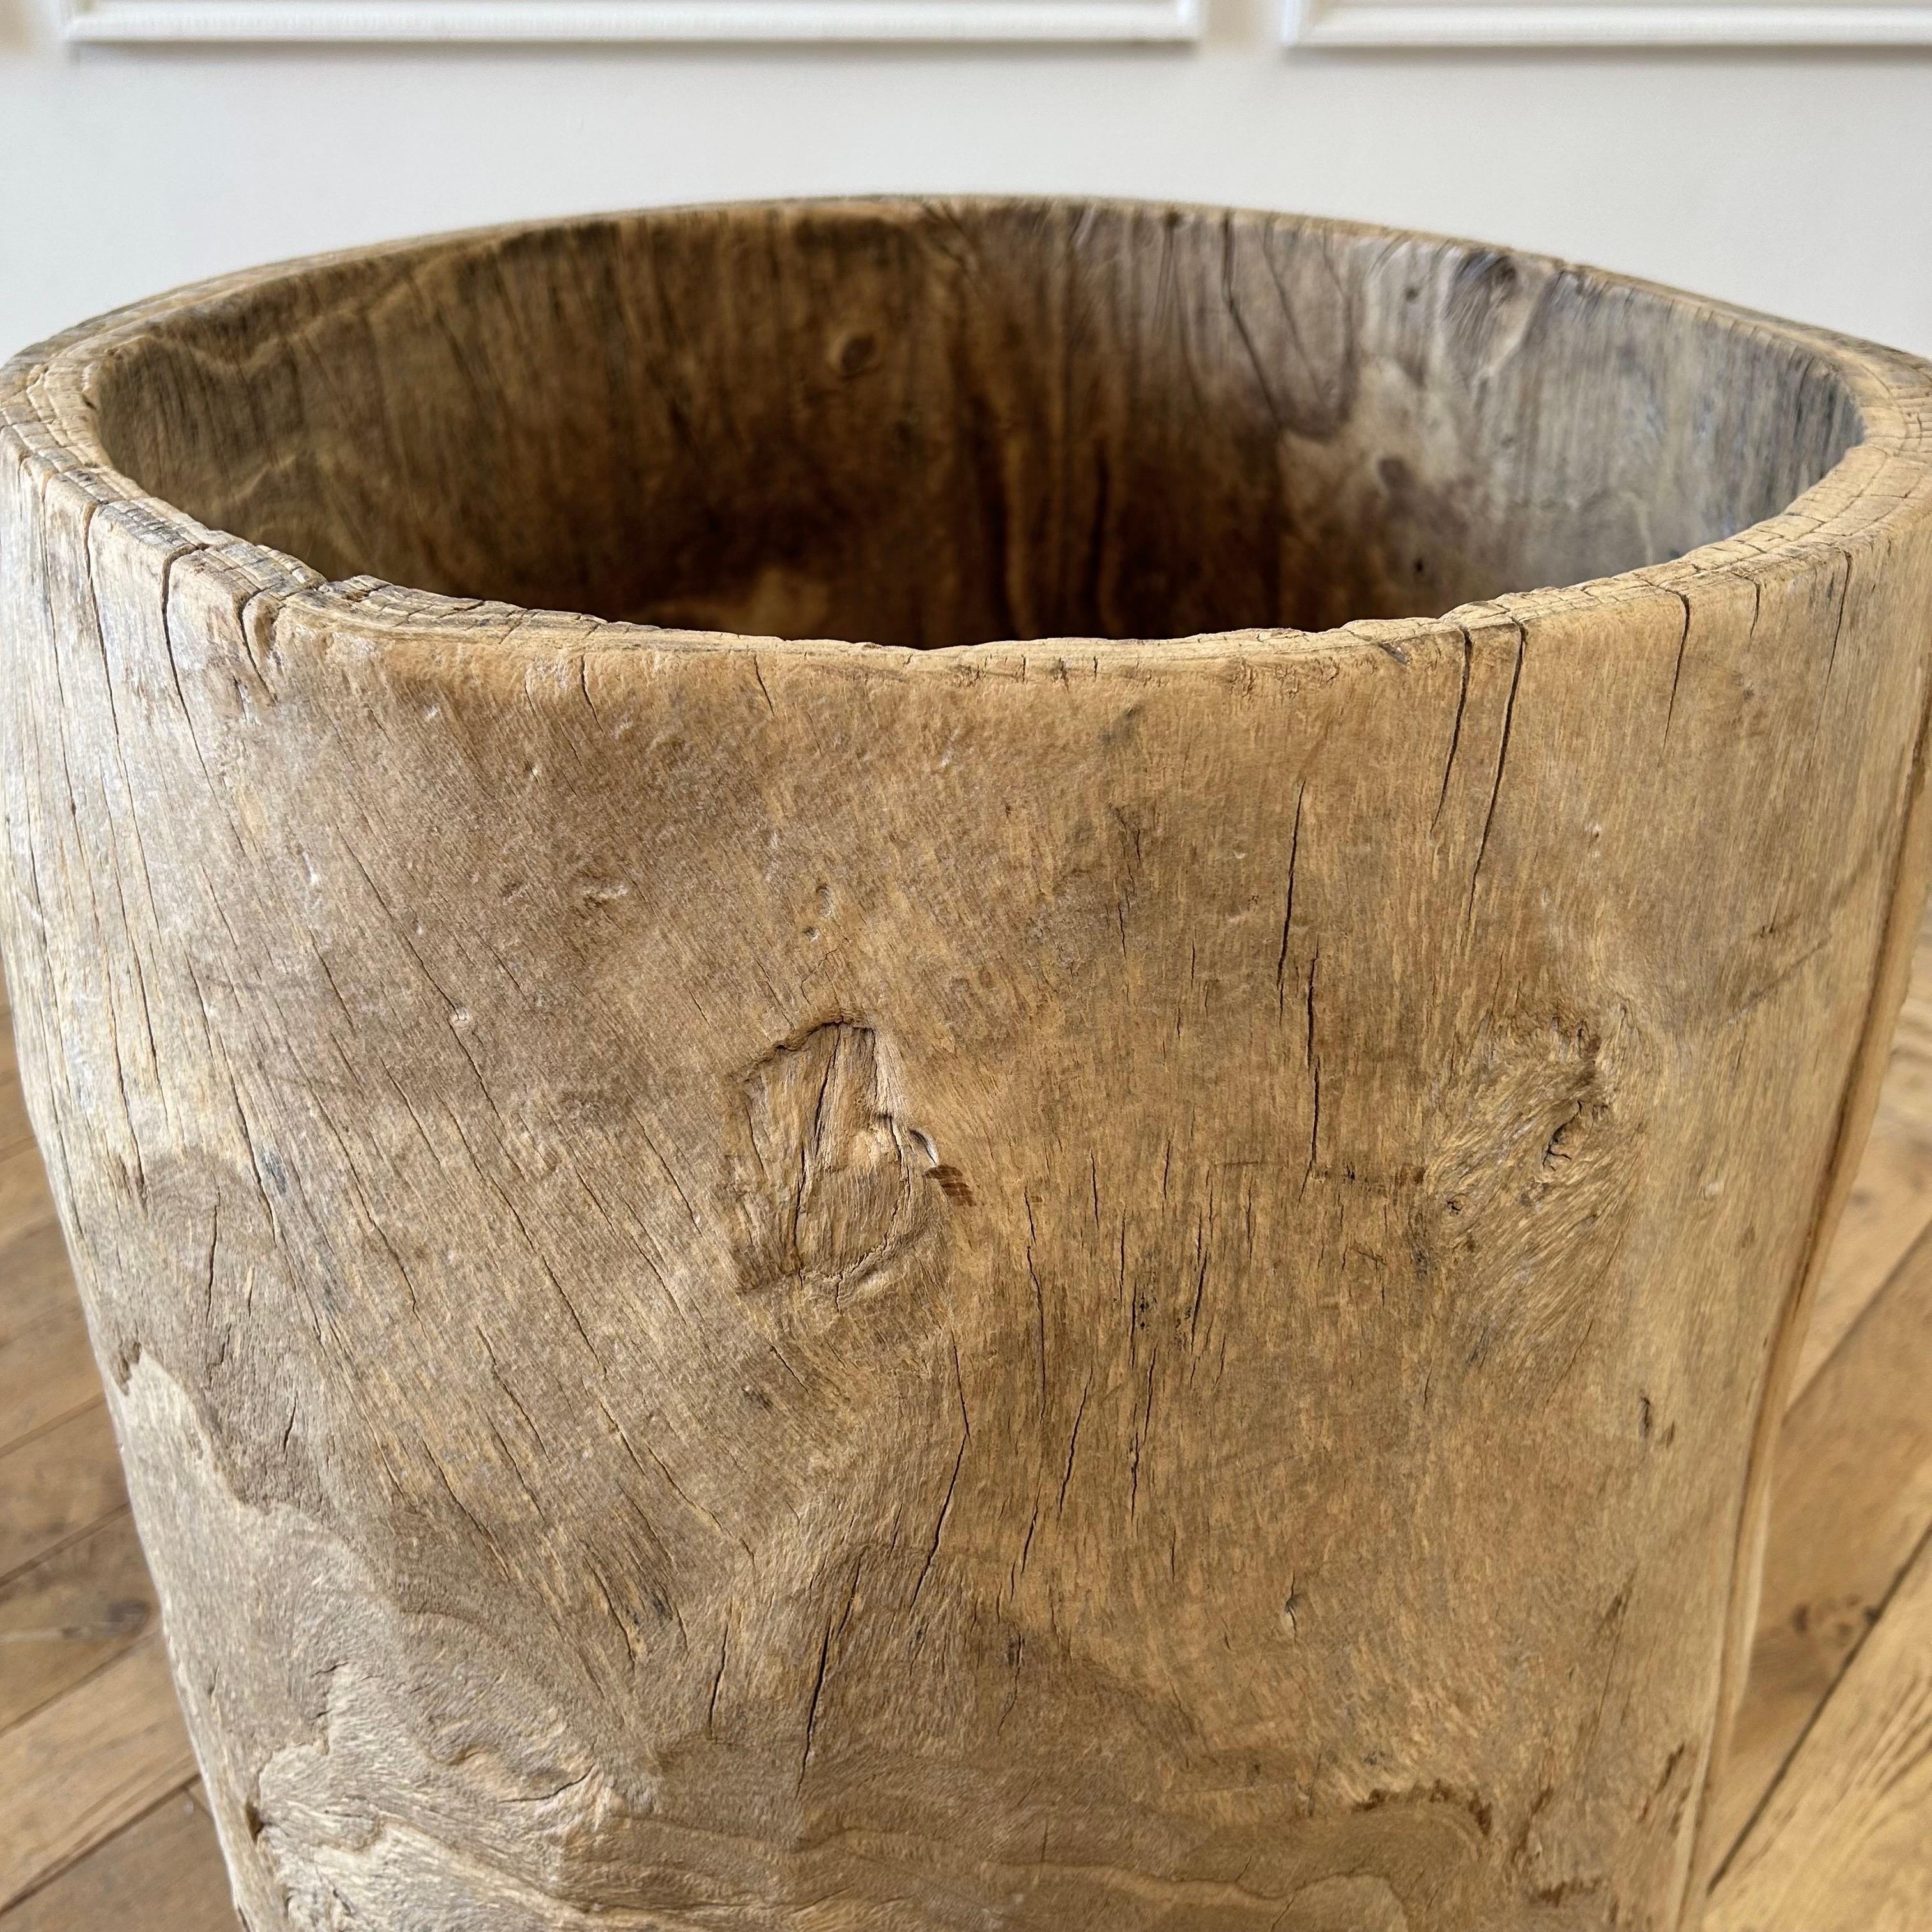 Large Carved Out Stump Decorative Planter 3